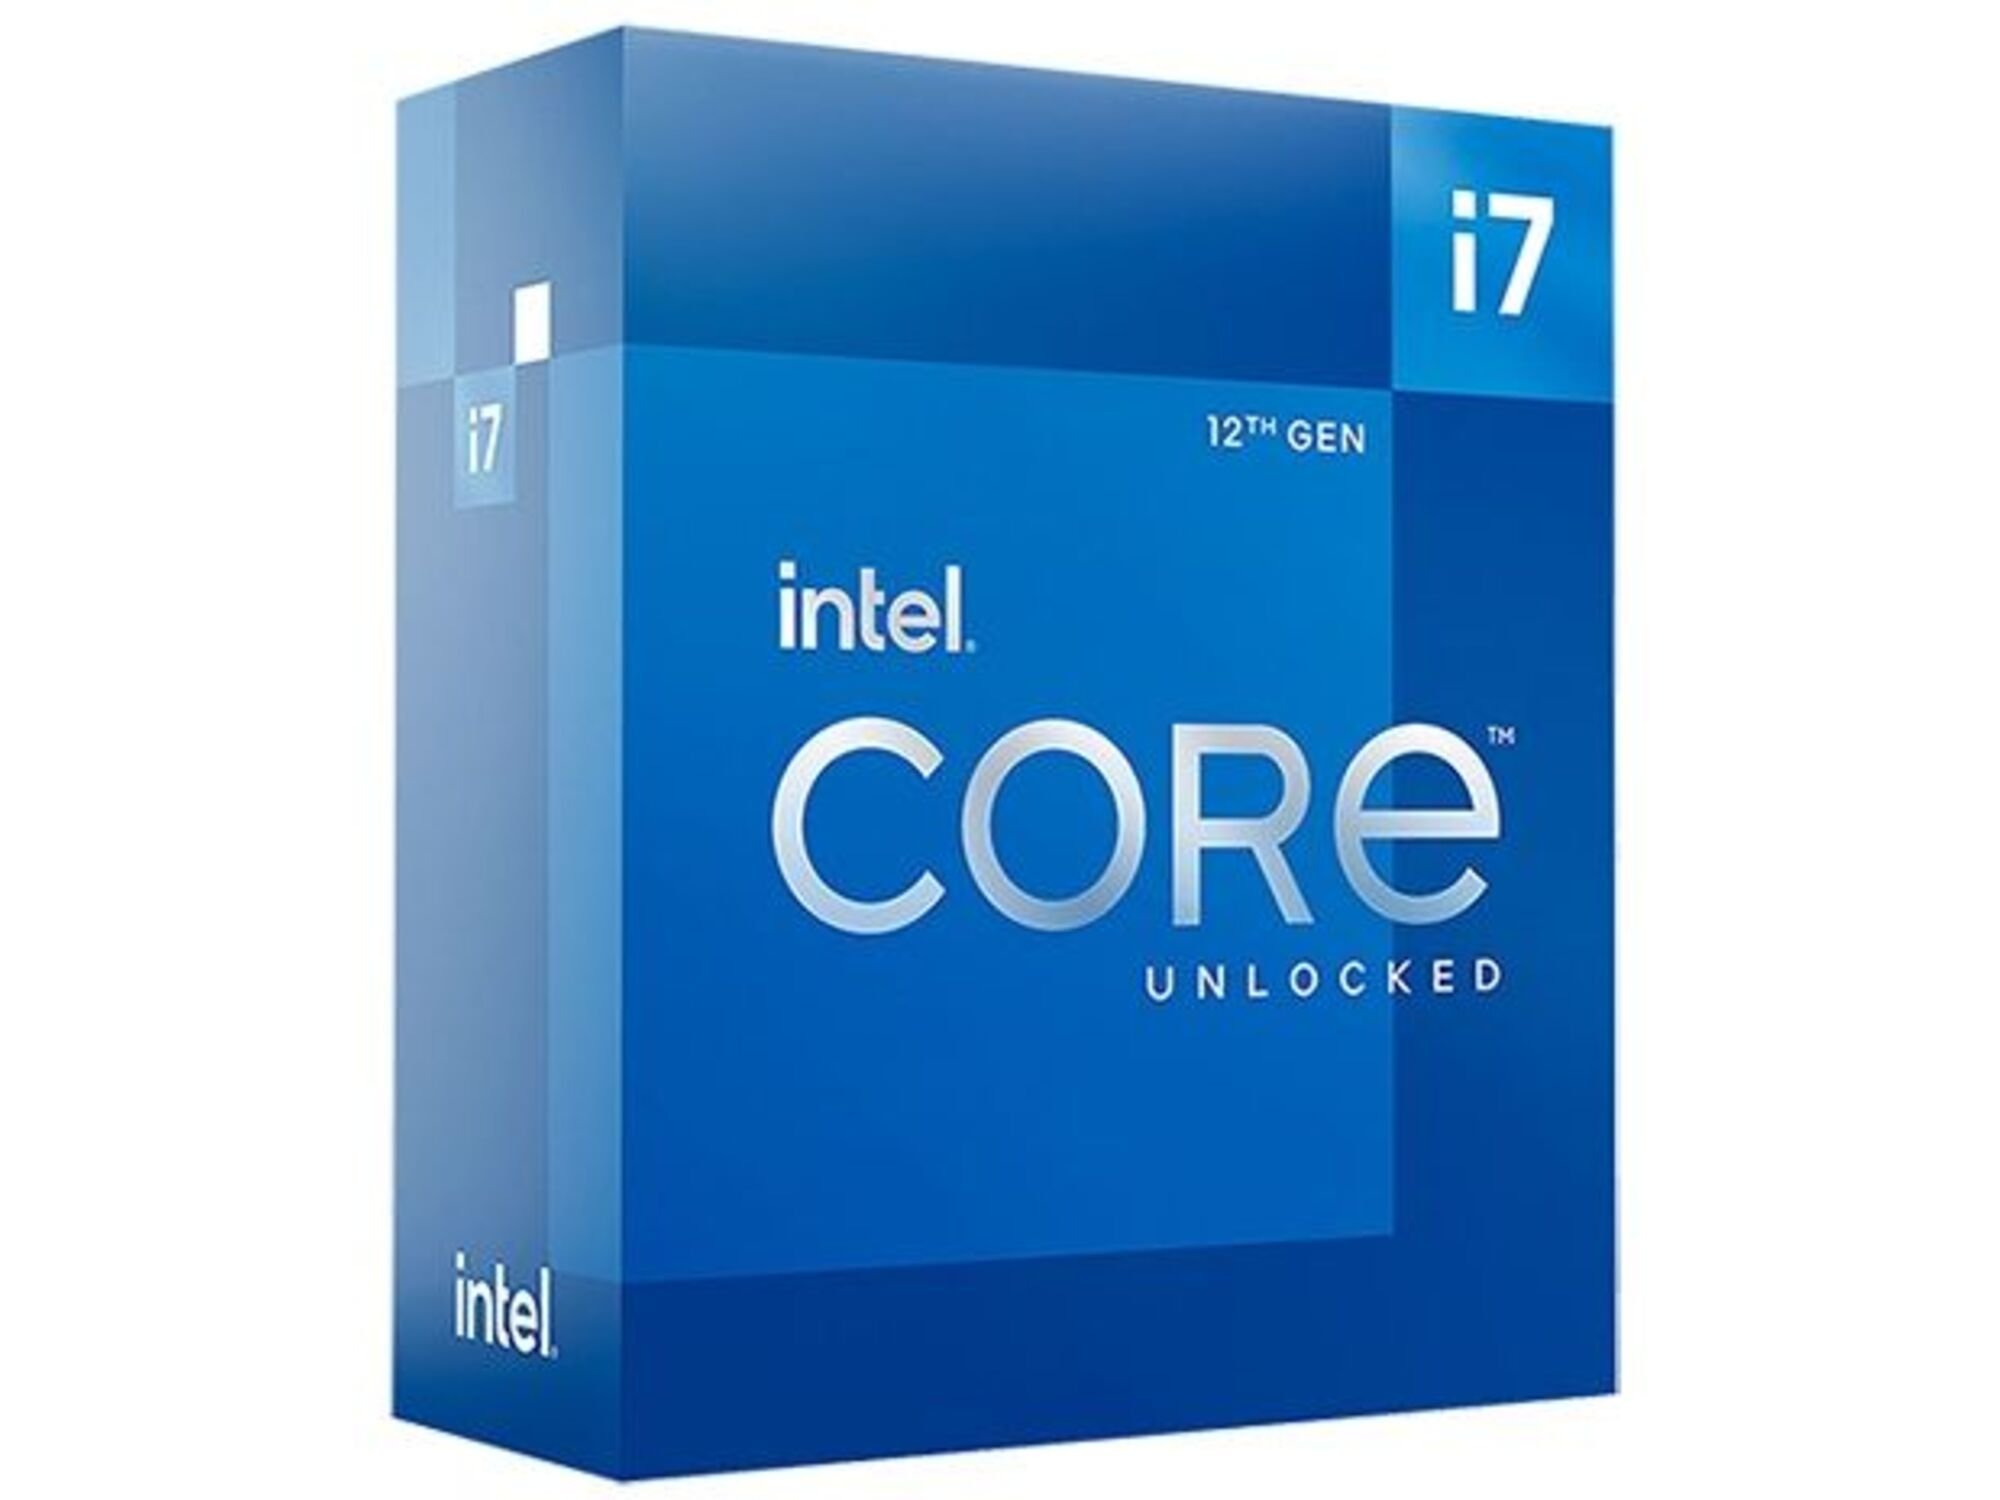 Intel Procesor Core i7-12700K 12-Core 2.7GHz up to 5.00GHz